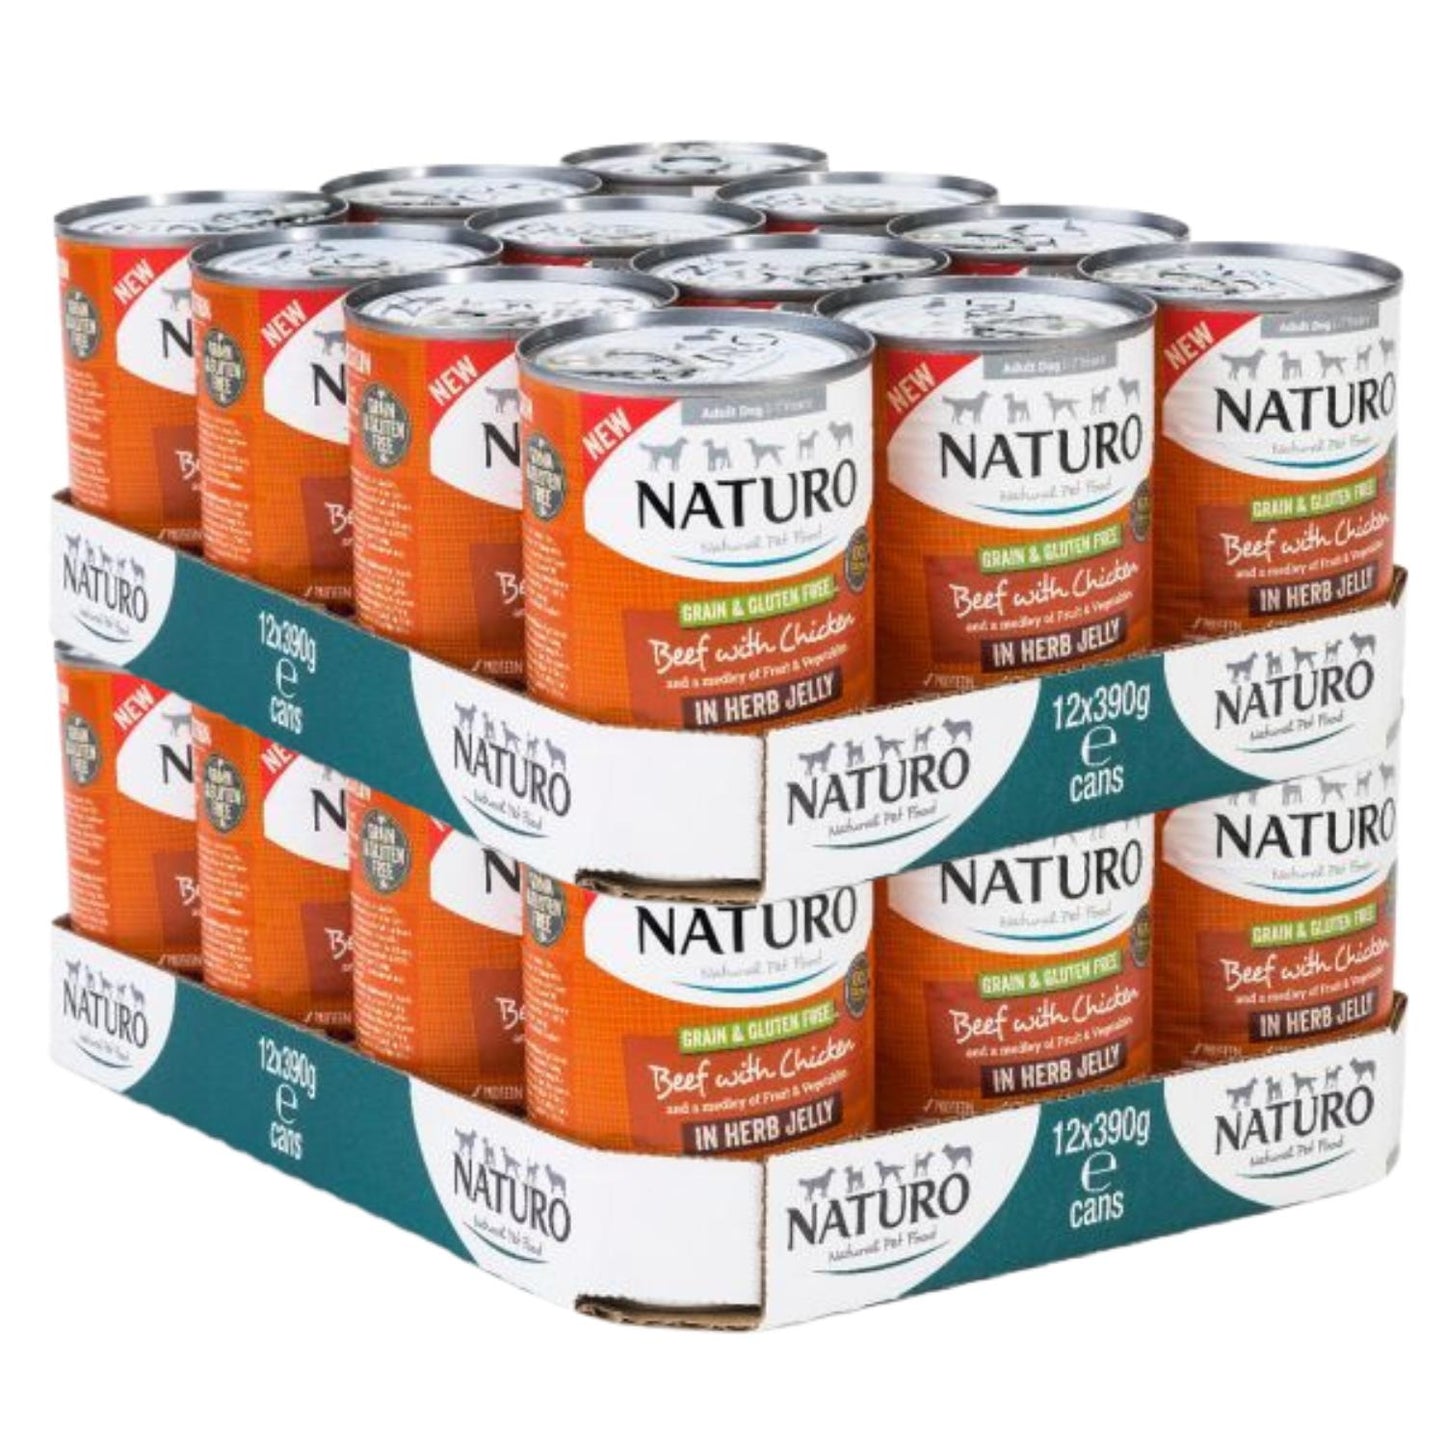 Naturo | Grain Free Wet Dog Food | Beef & Chicken in a Herb Jelly - 390g